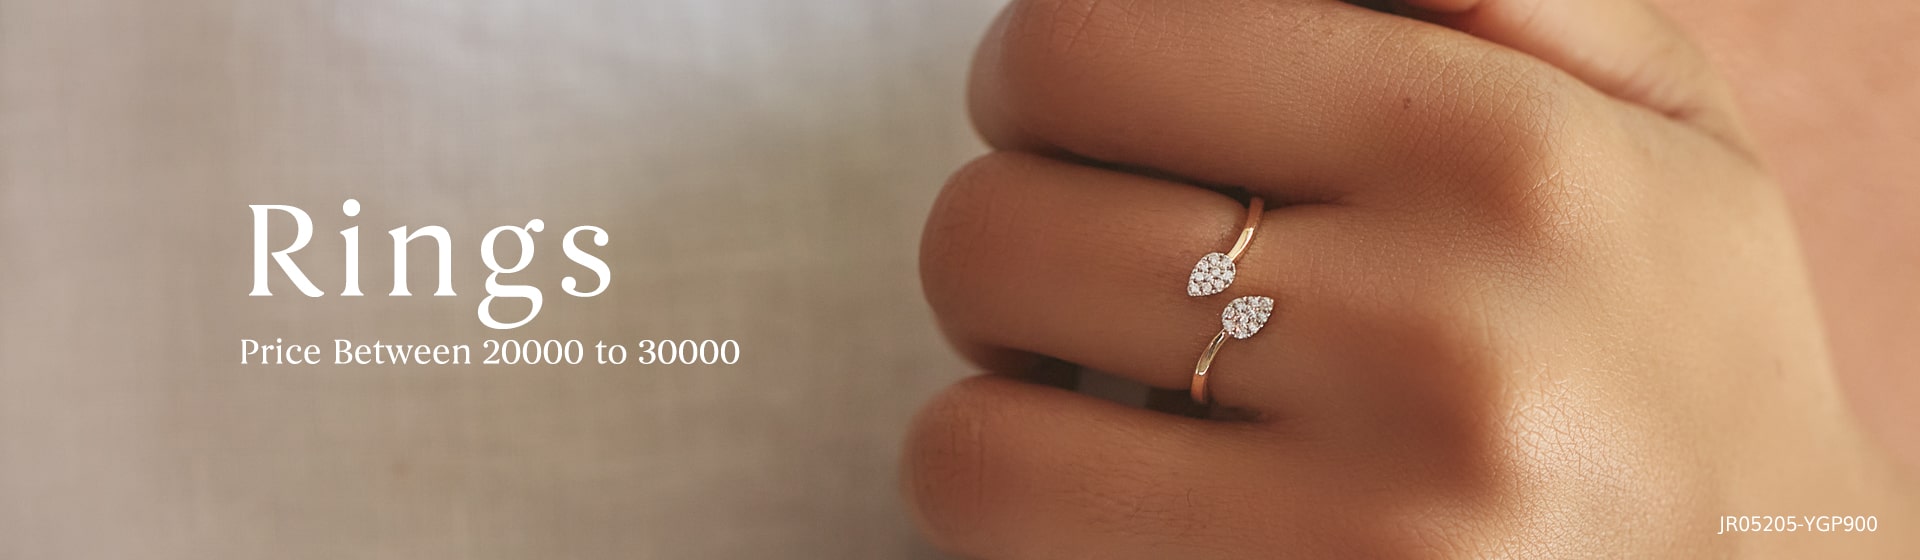 Shop Latest Collections Of Gold & Diamond Rings Price Between 20000 to 30000